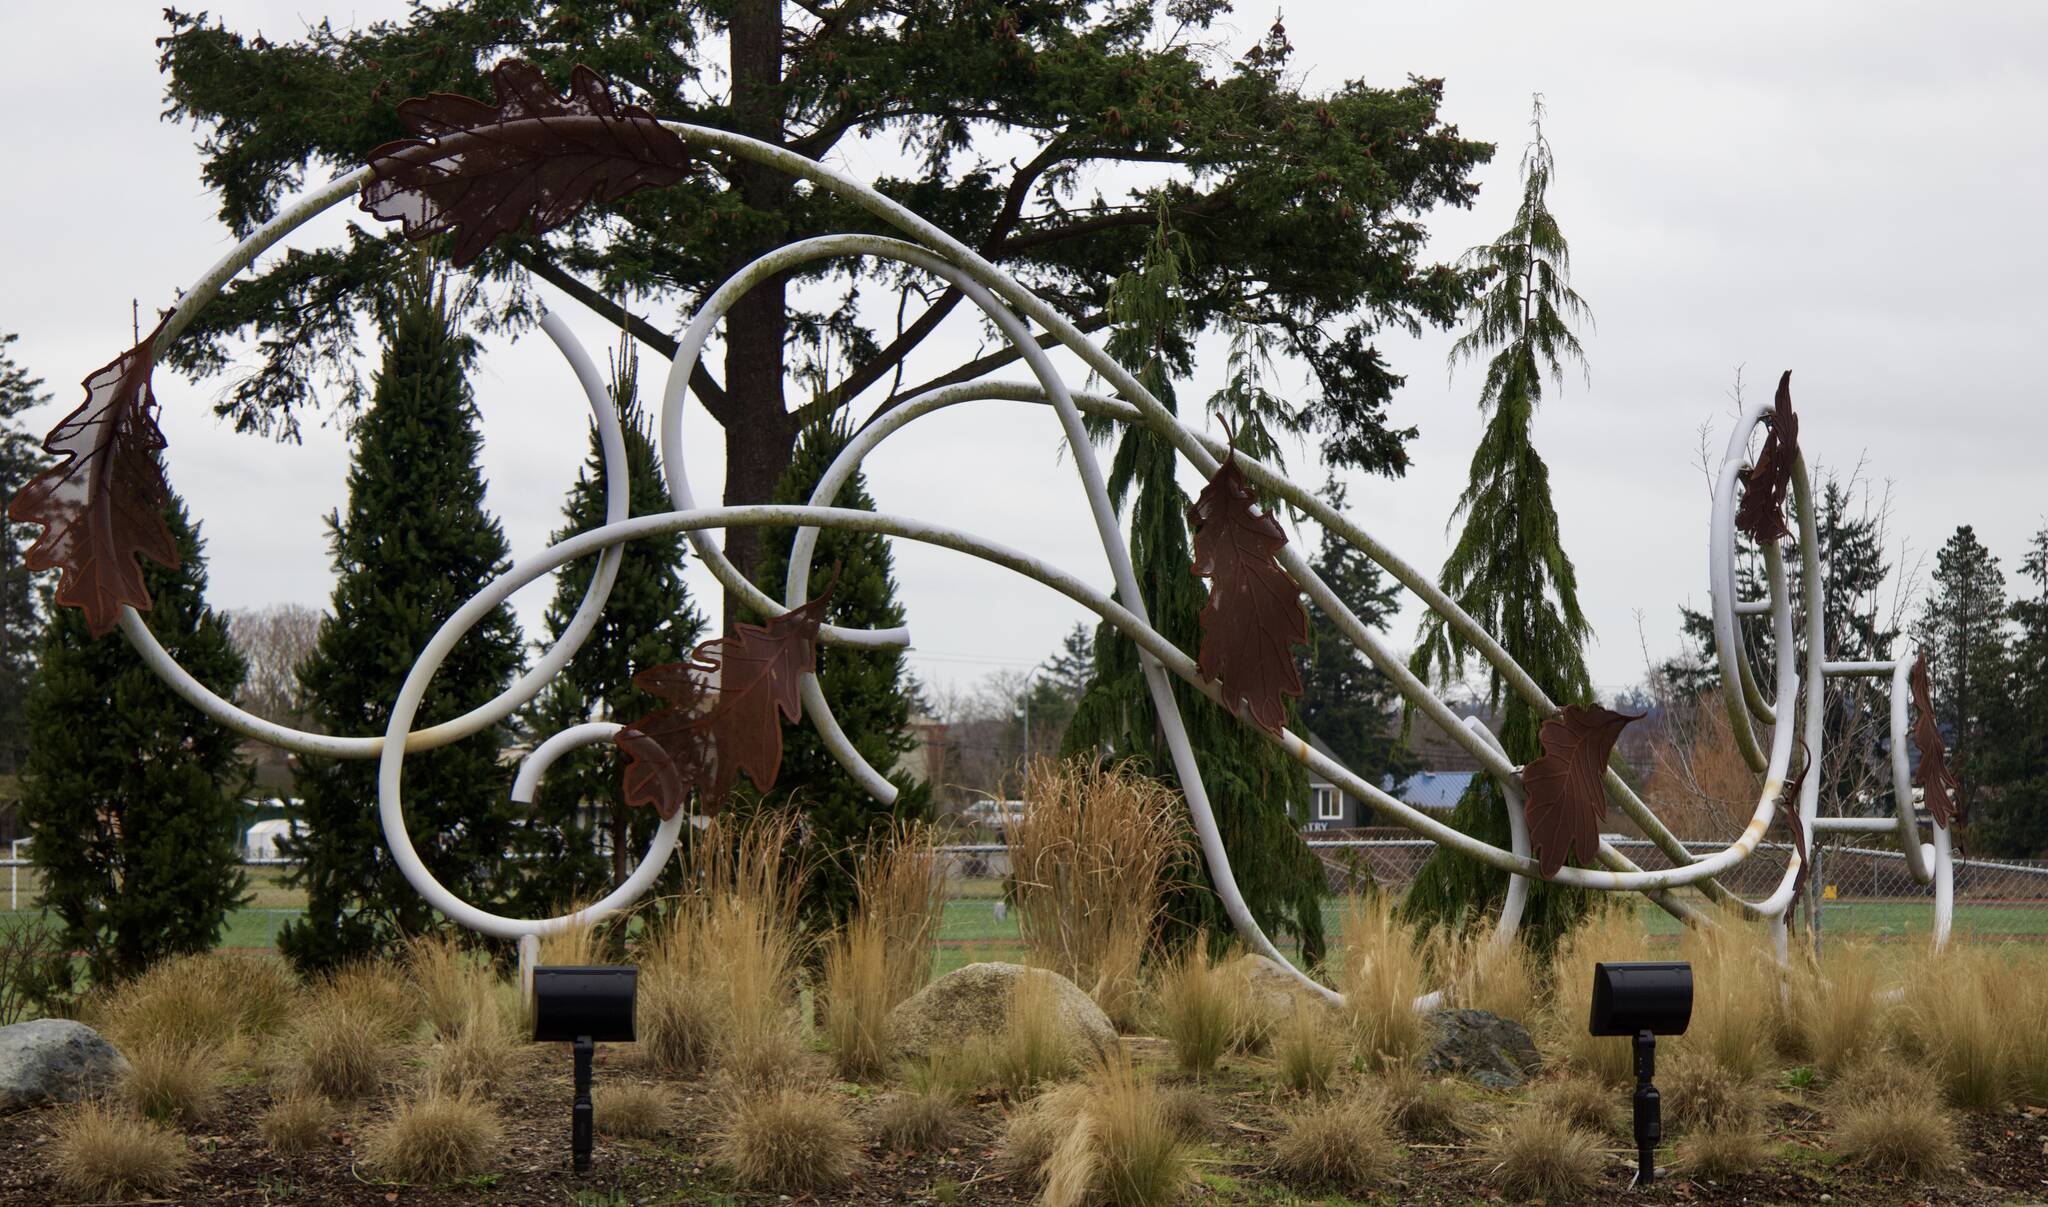 Photo by Rachel Rosen/Whidbey News-Times
“Autumn Leaves,” a sculpture on Highway 20, was one of the city’s arts-fund projects that has inspired mixed feelings. It was installed in 2017.